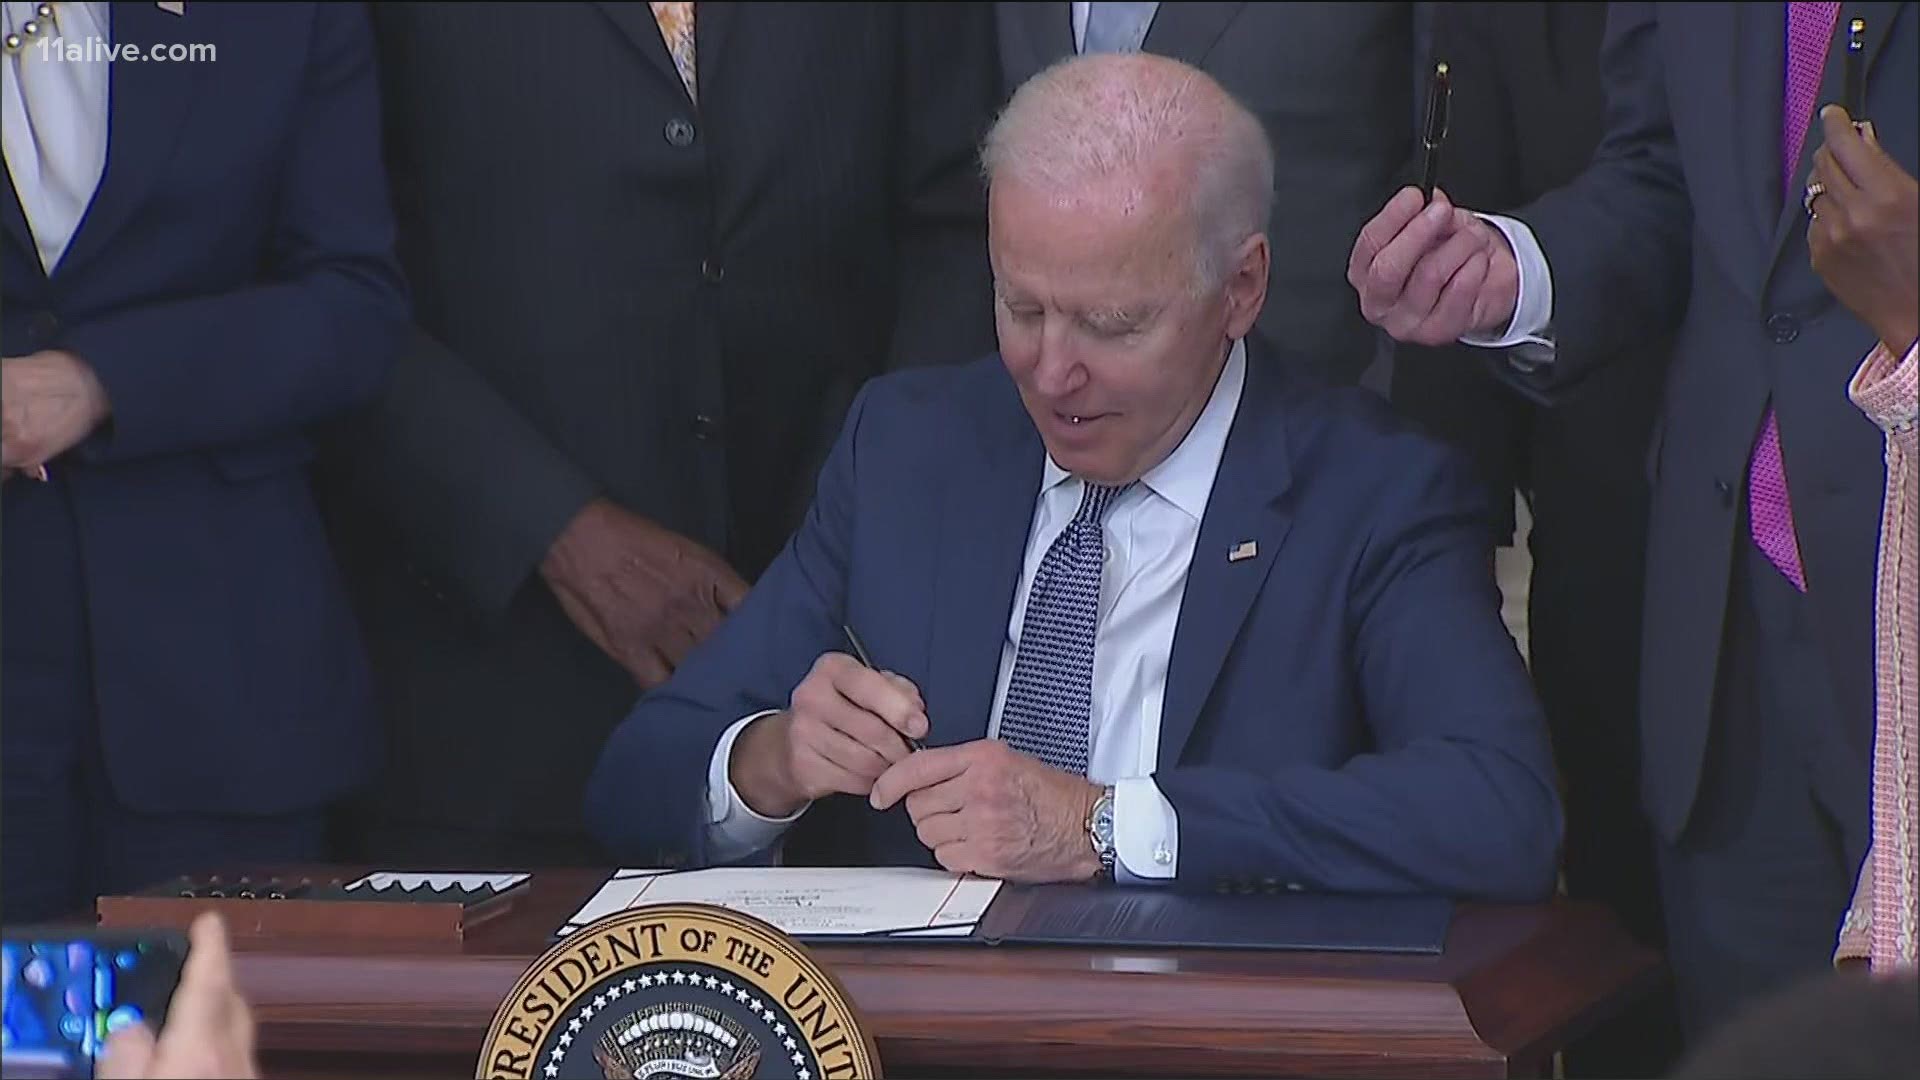 President Biden signed the bill into law.